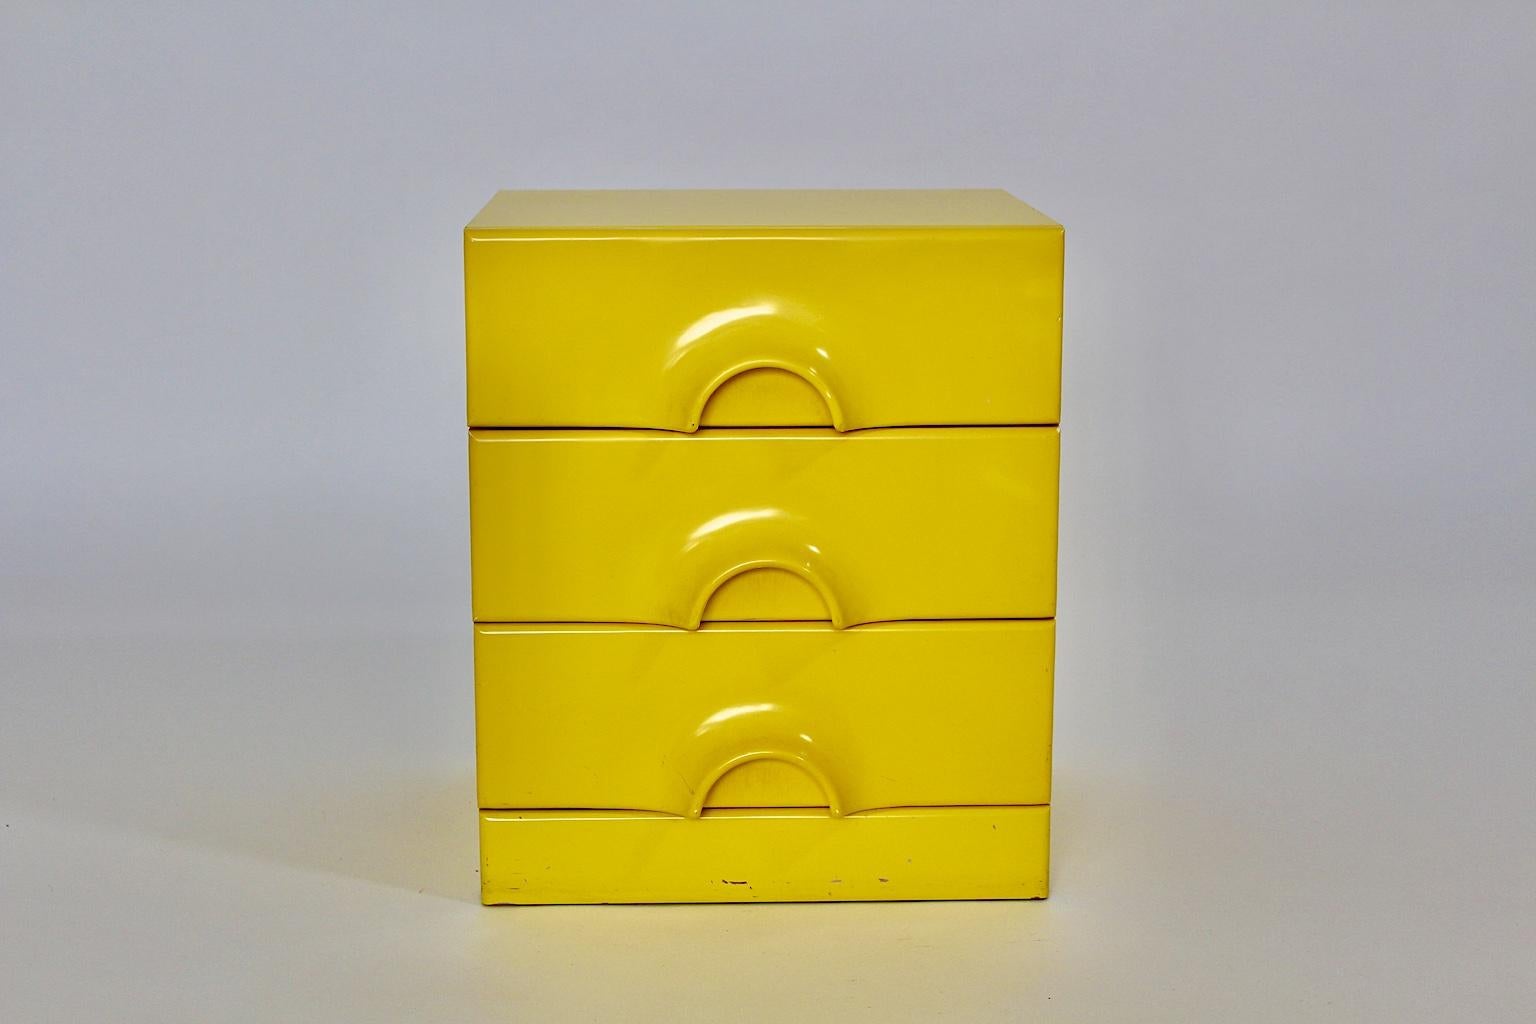 Modern Pop Art Style vintage yellow chest of drawers from plastic coated pressboard in yellow color tone circa 1970 Germany.
The body of the chest was made of pressboard while the surface was laminated with yellow plastic.
The 3 drawers show